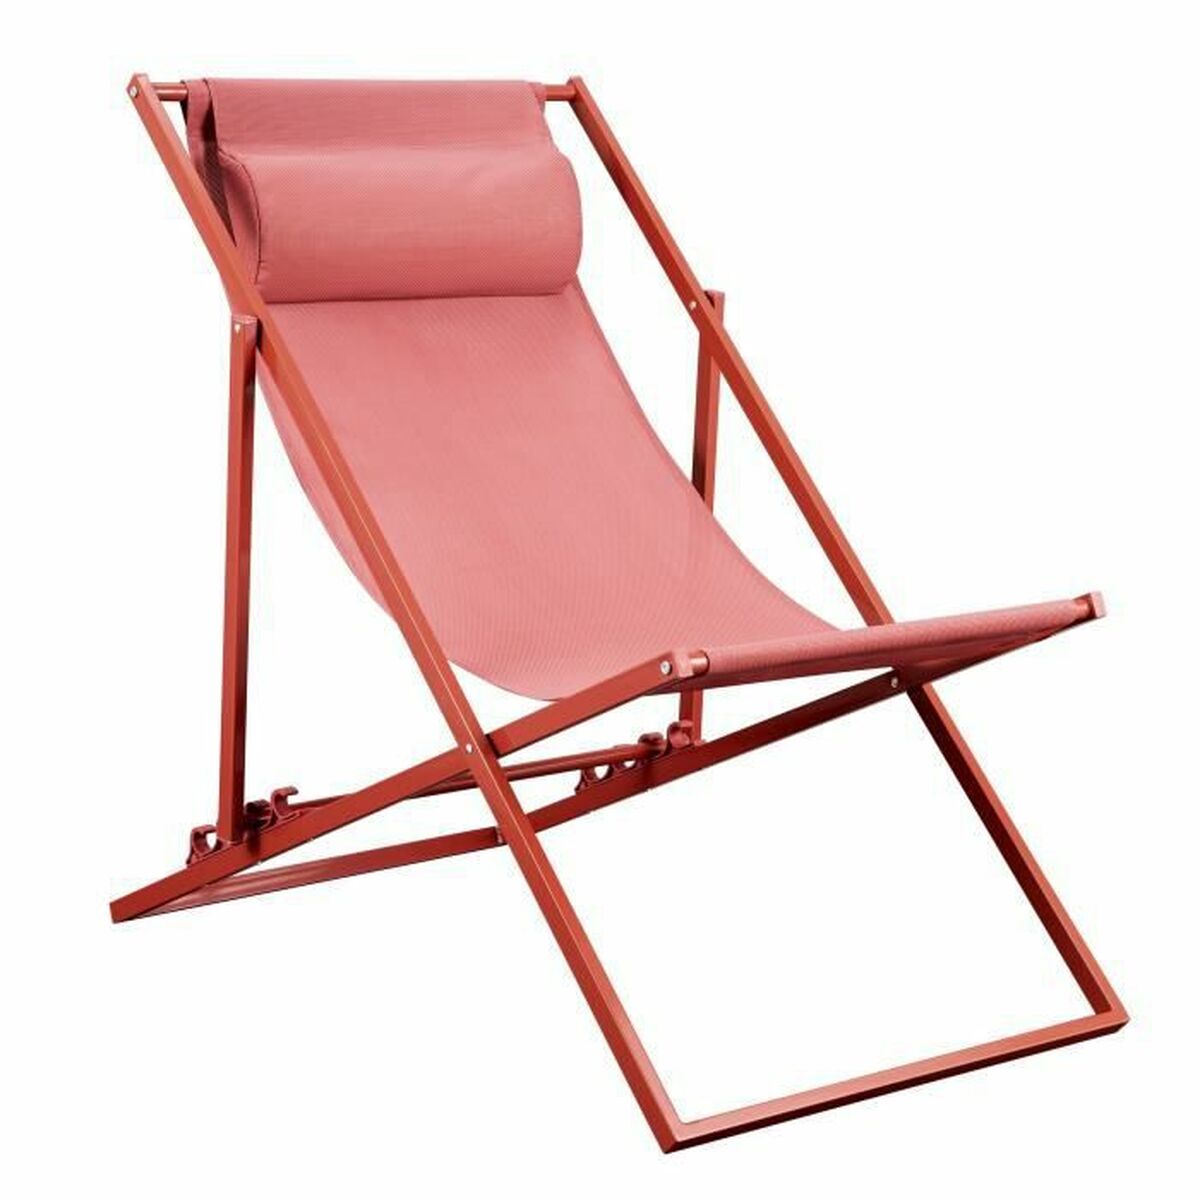 Sun-lounger Red Foldable